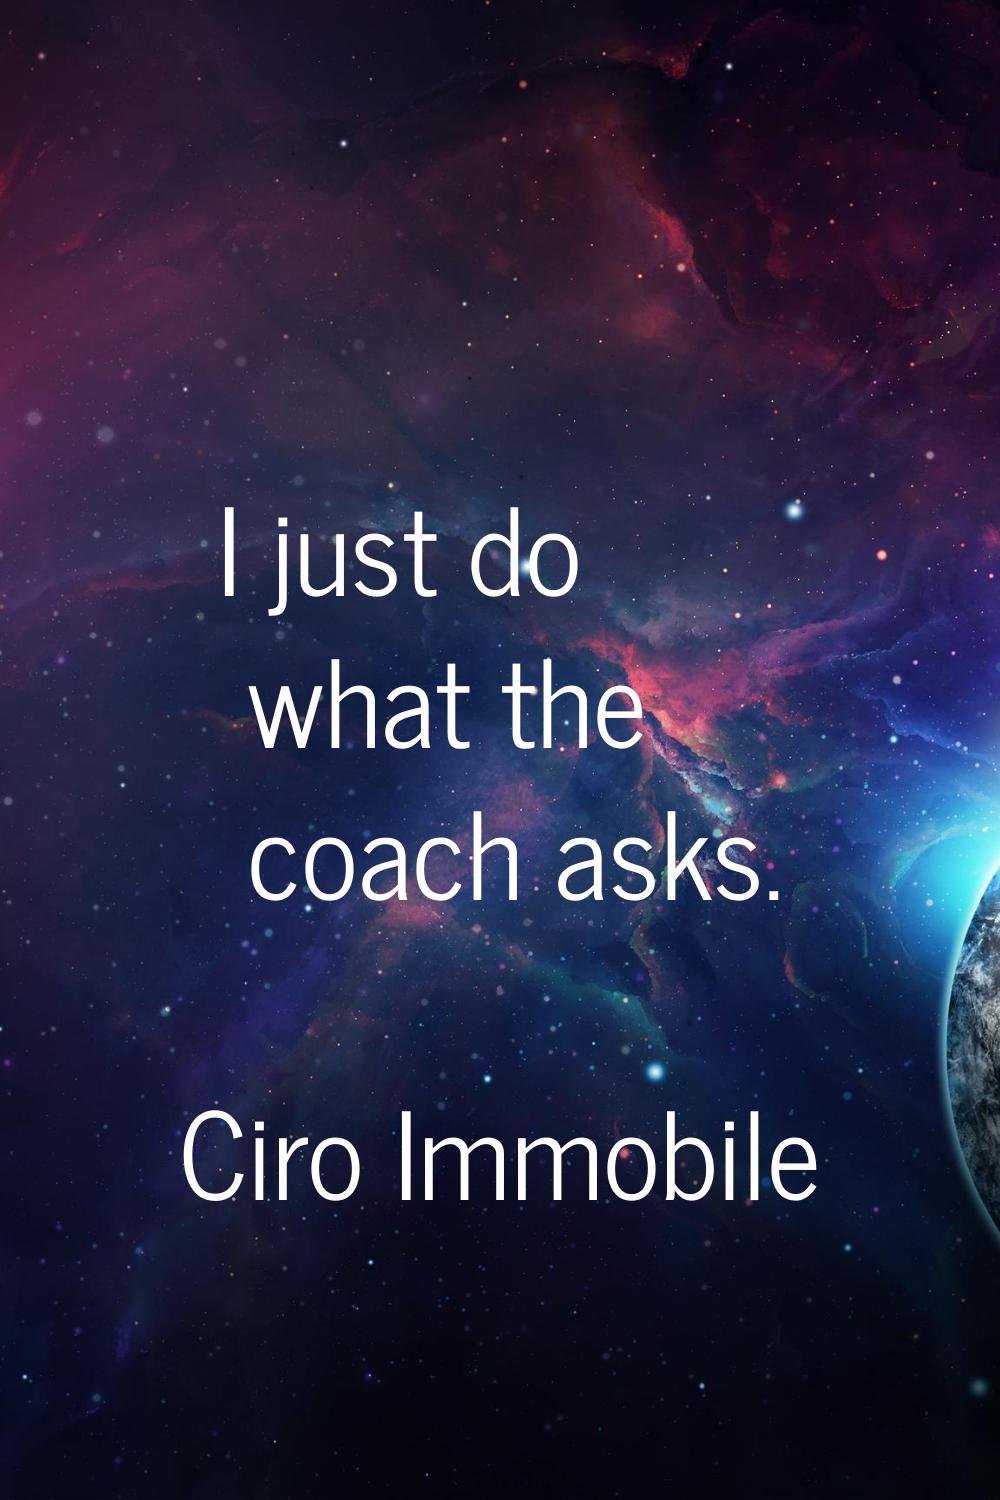 I just do what the coach asks.